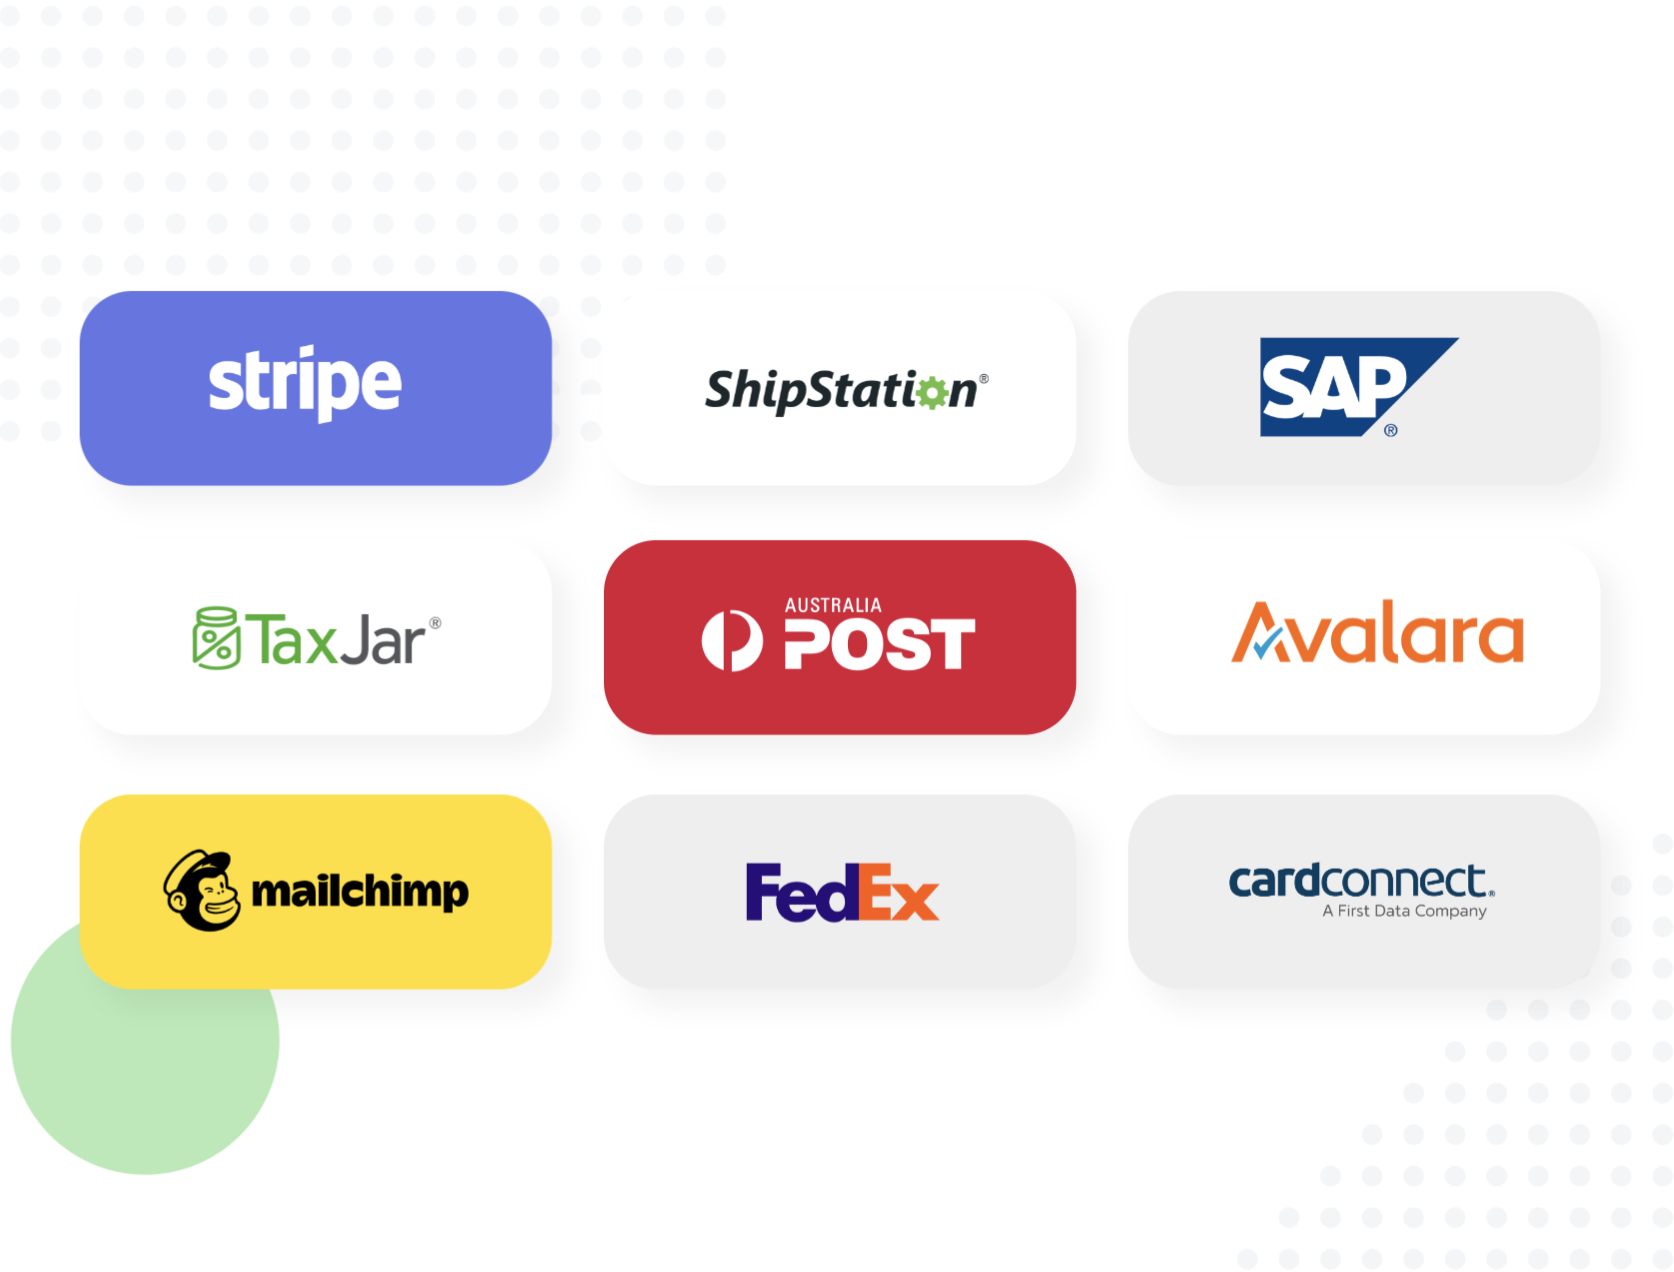 Content management system integrations with SAP STRIPE Microsoft and many more